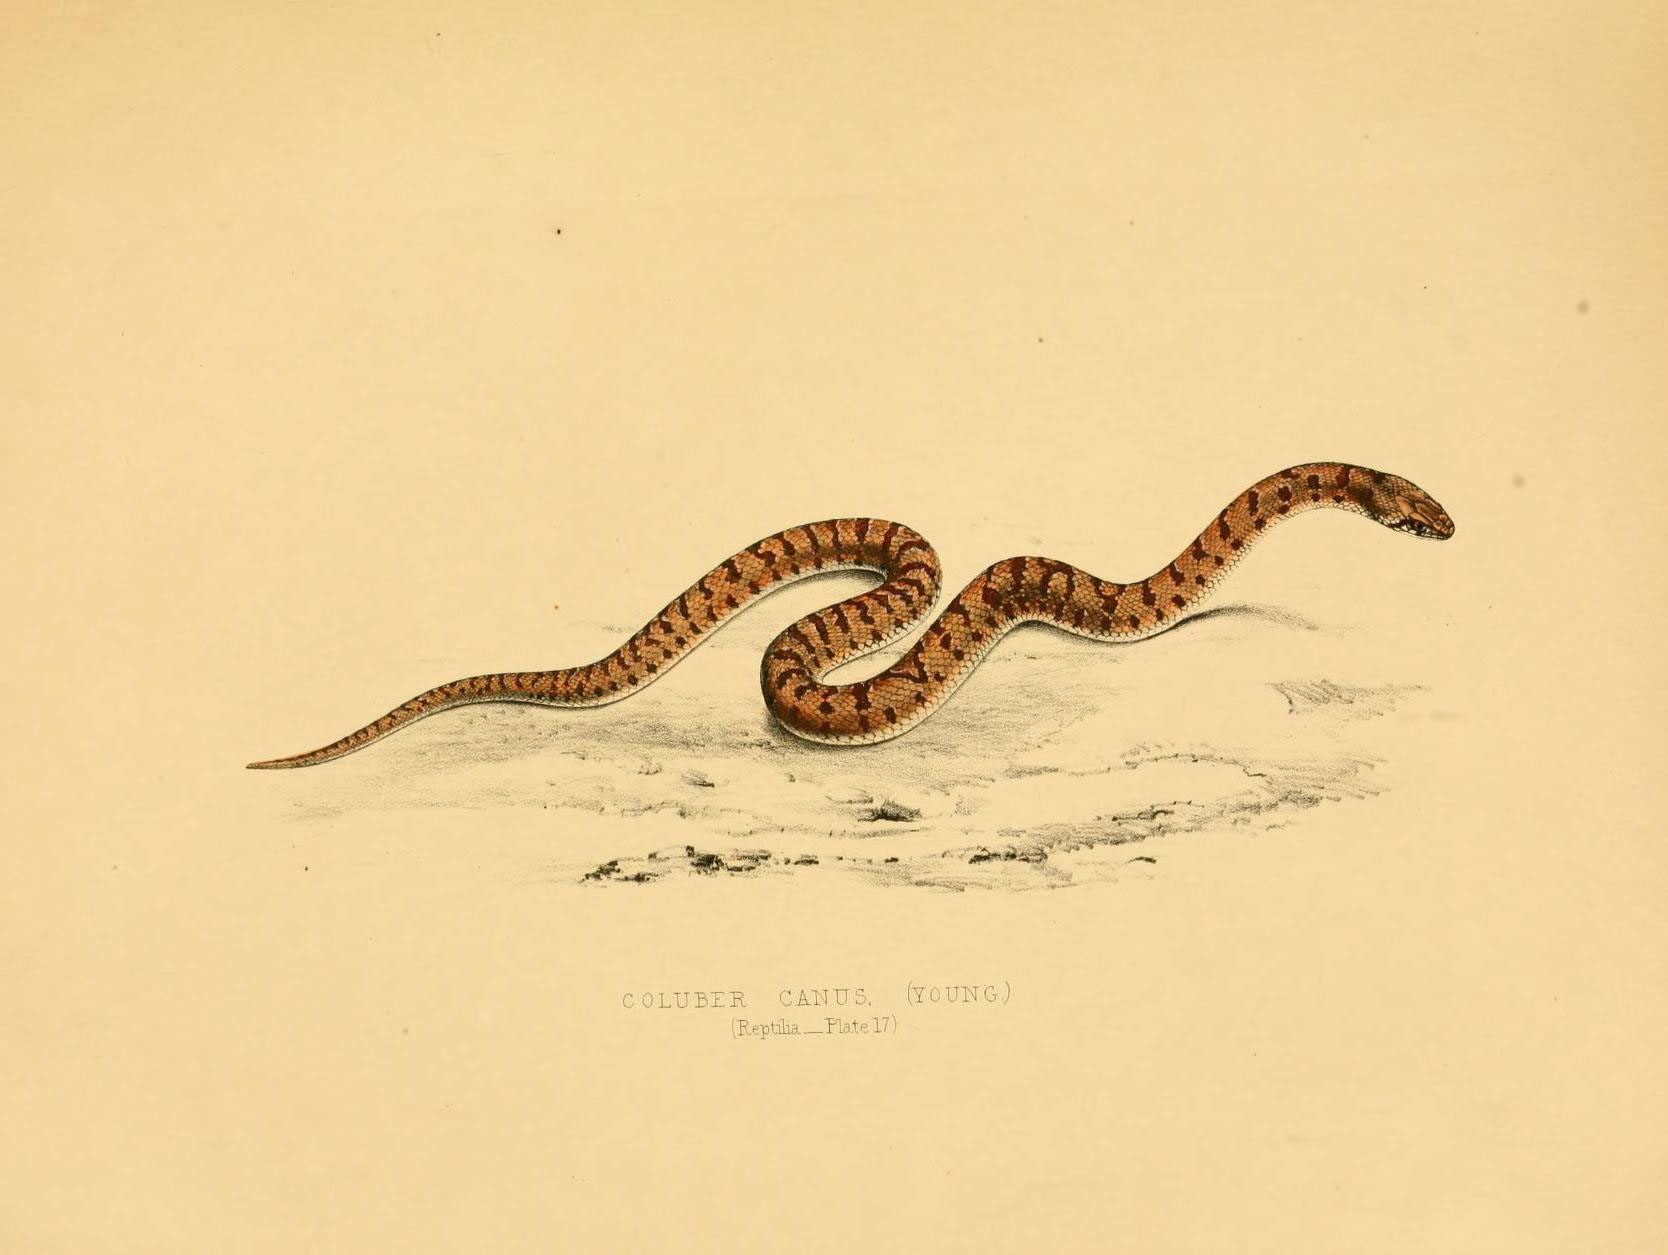 a snake with its mouth open laying on the ground